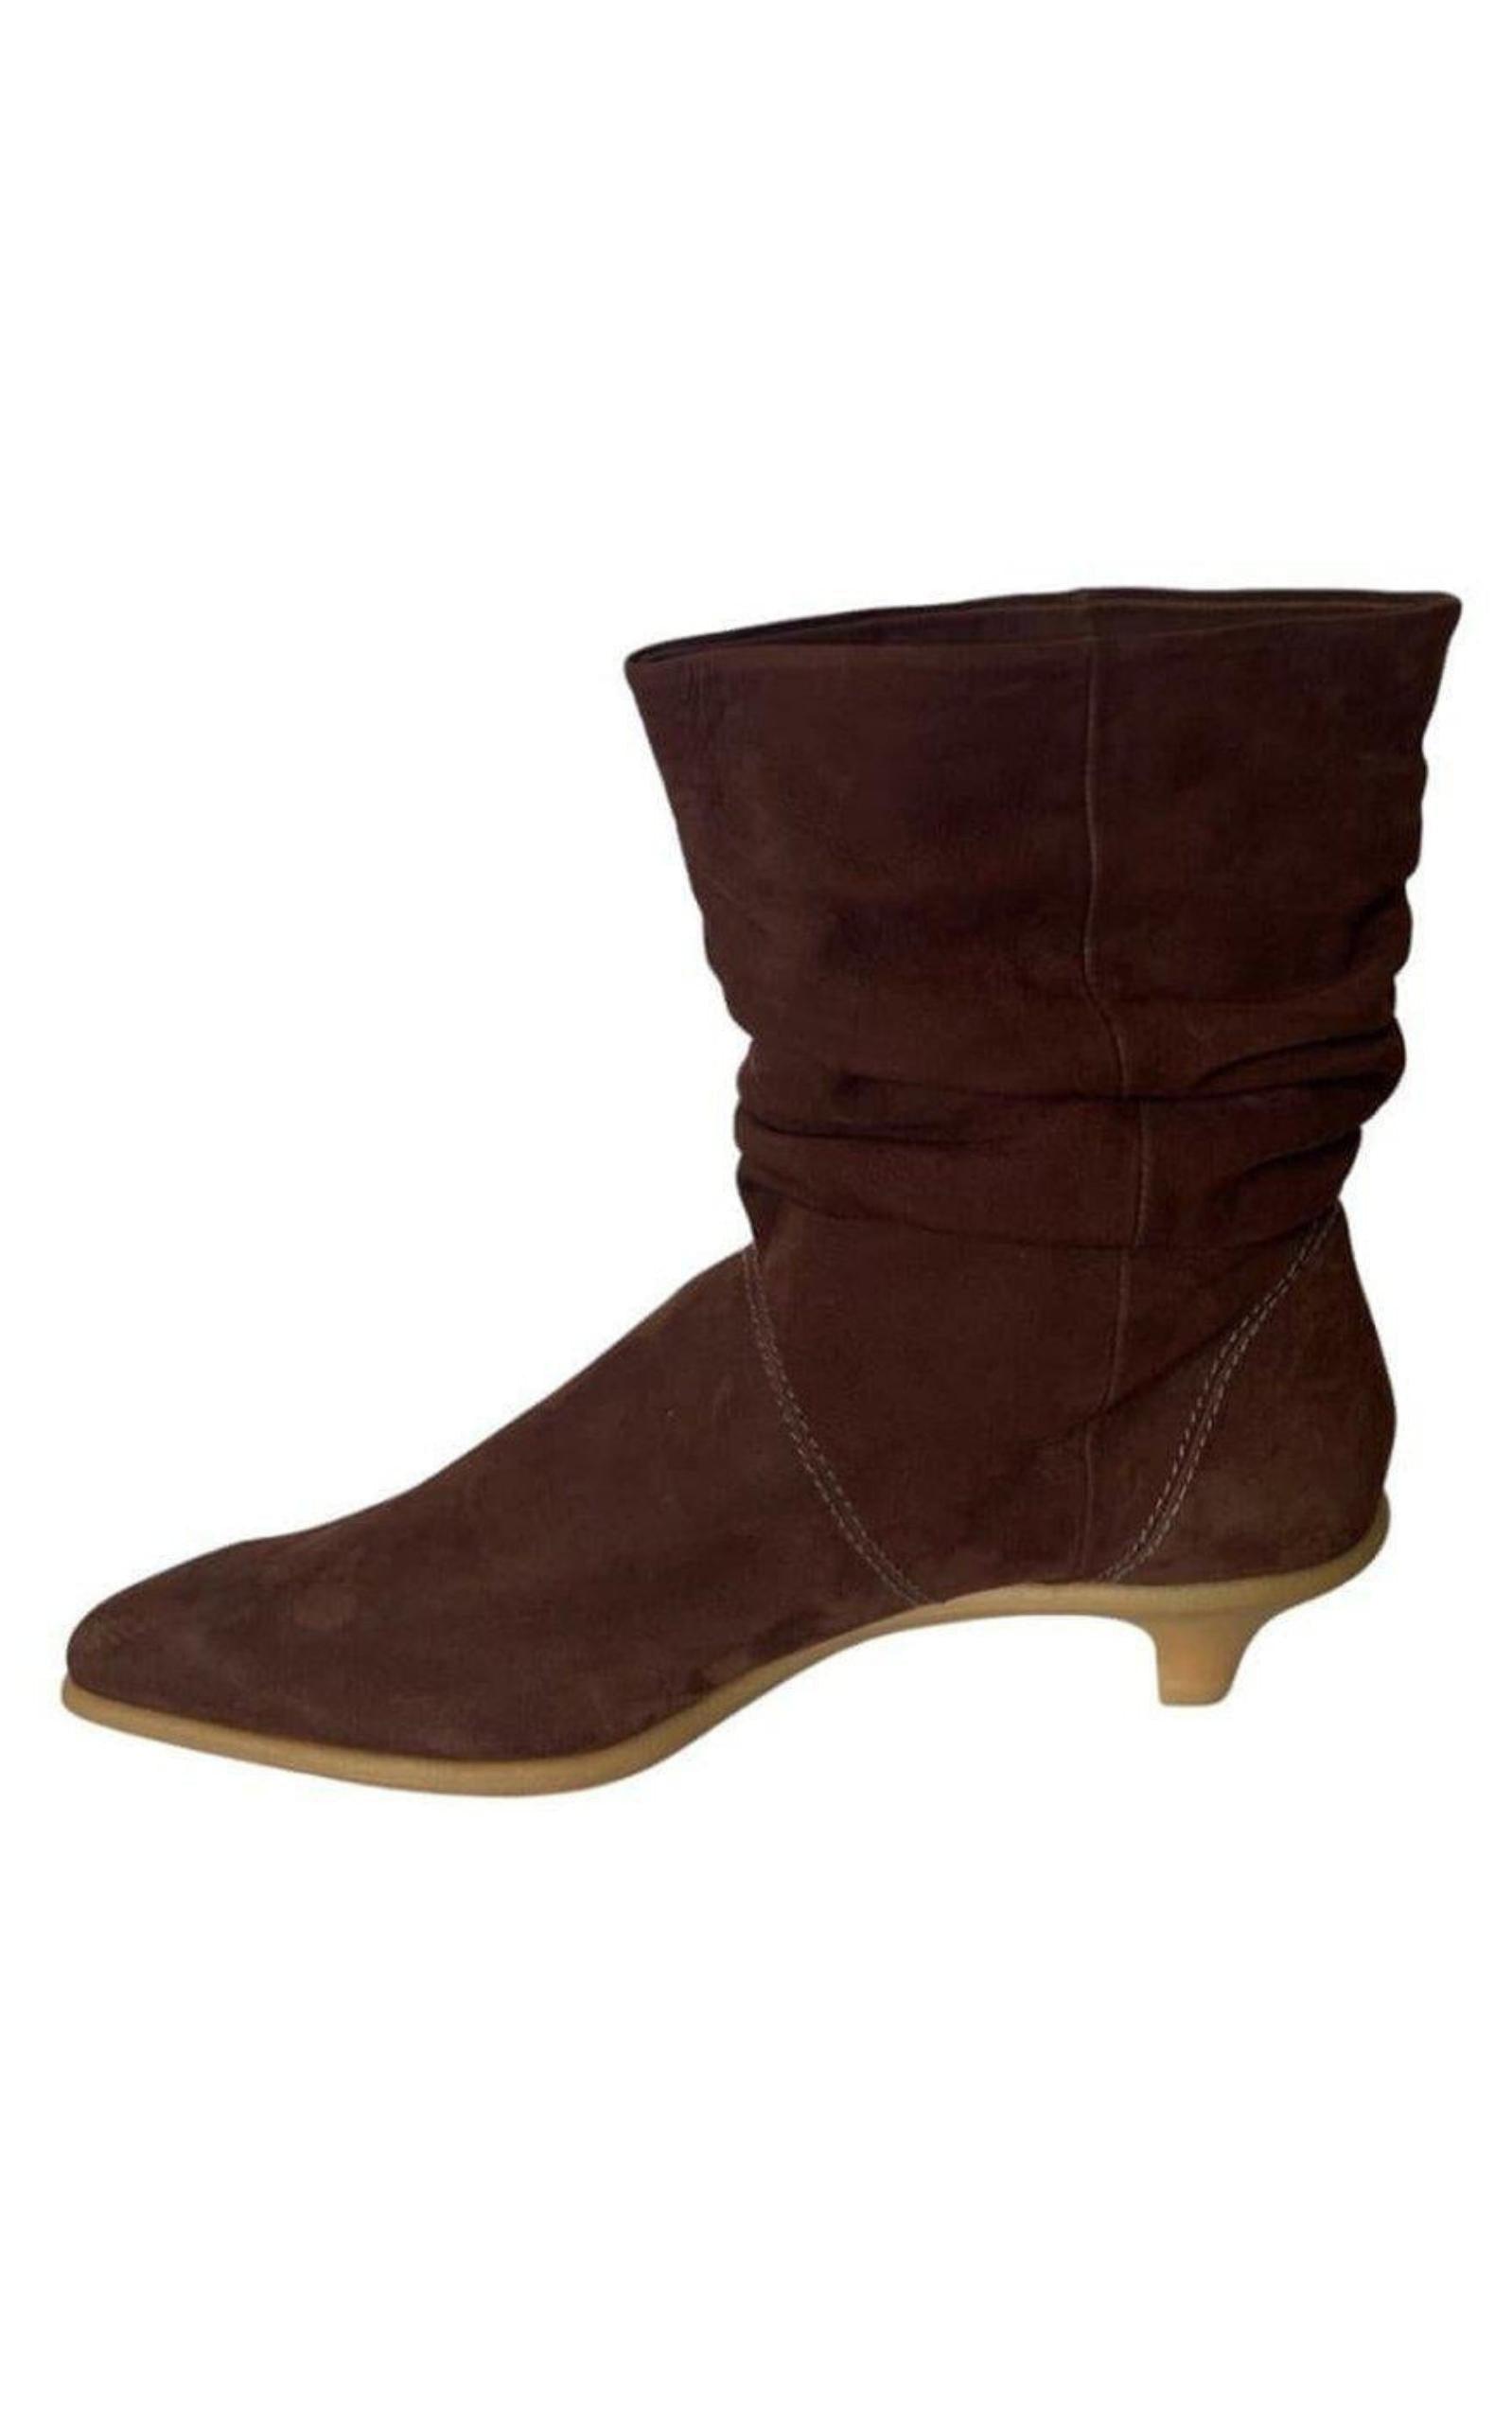  BCBGMAXAZRIABrown Leather Boots - Runway Catalog